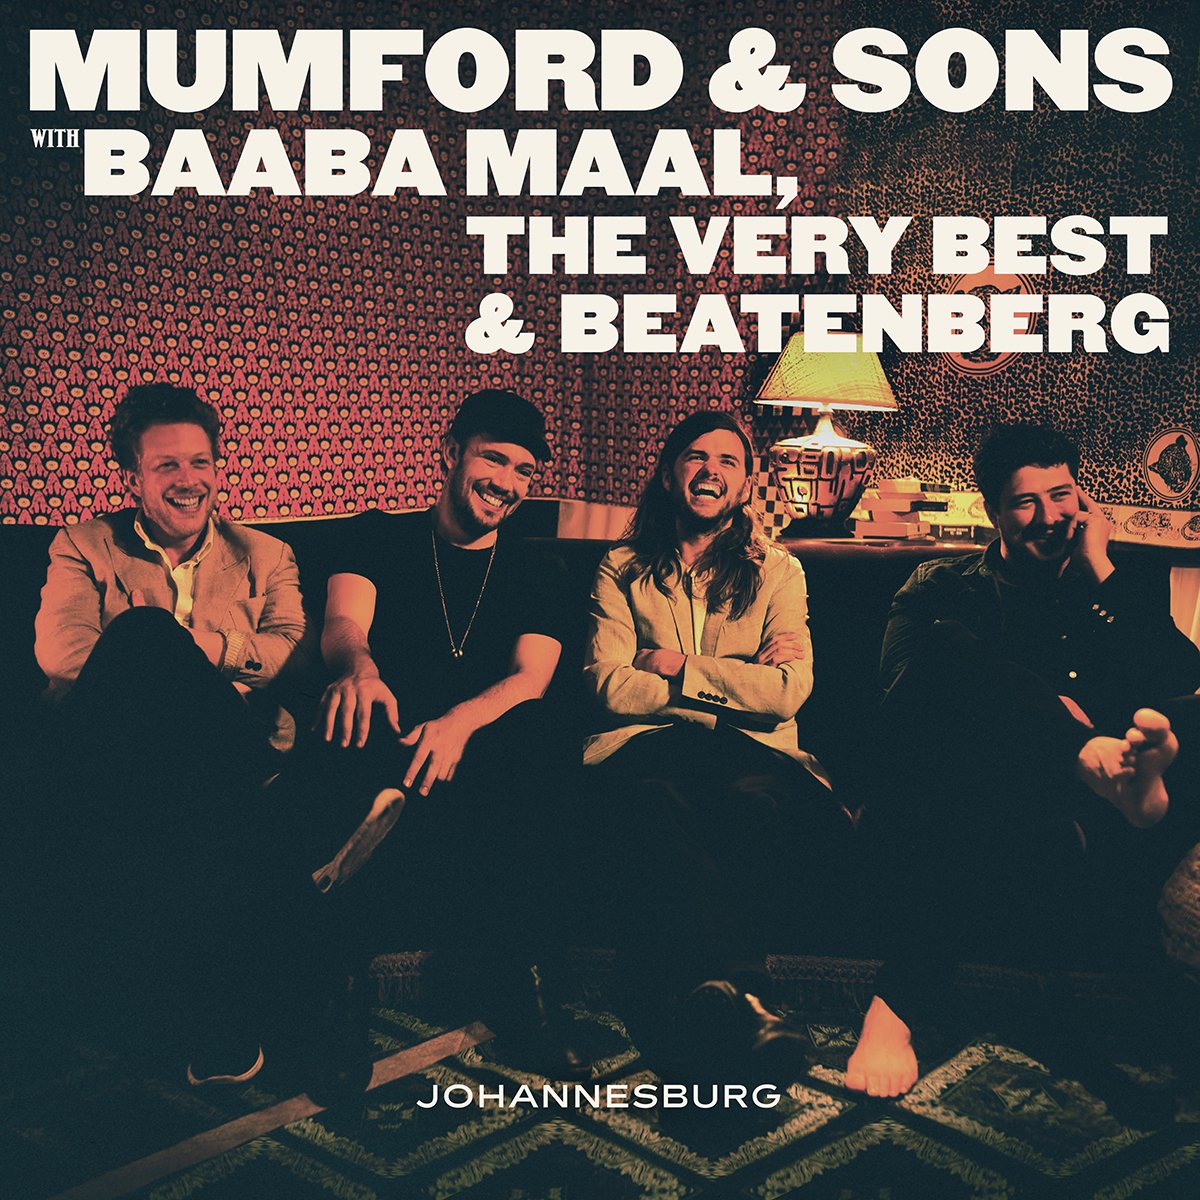 Mumford \u0026amp; Sons on Twitter: \u0026quot;Johannesburg, a collection of songs w ...